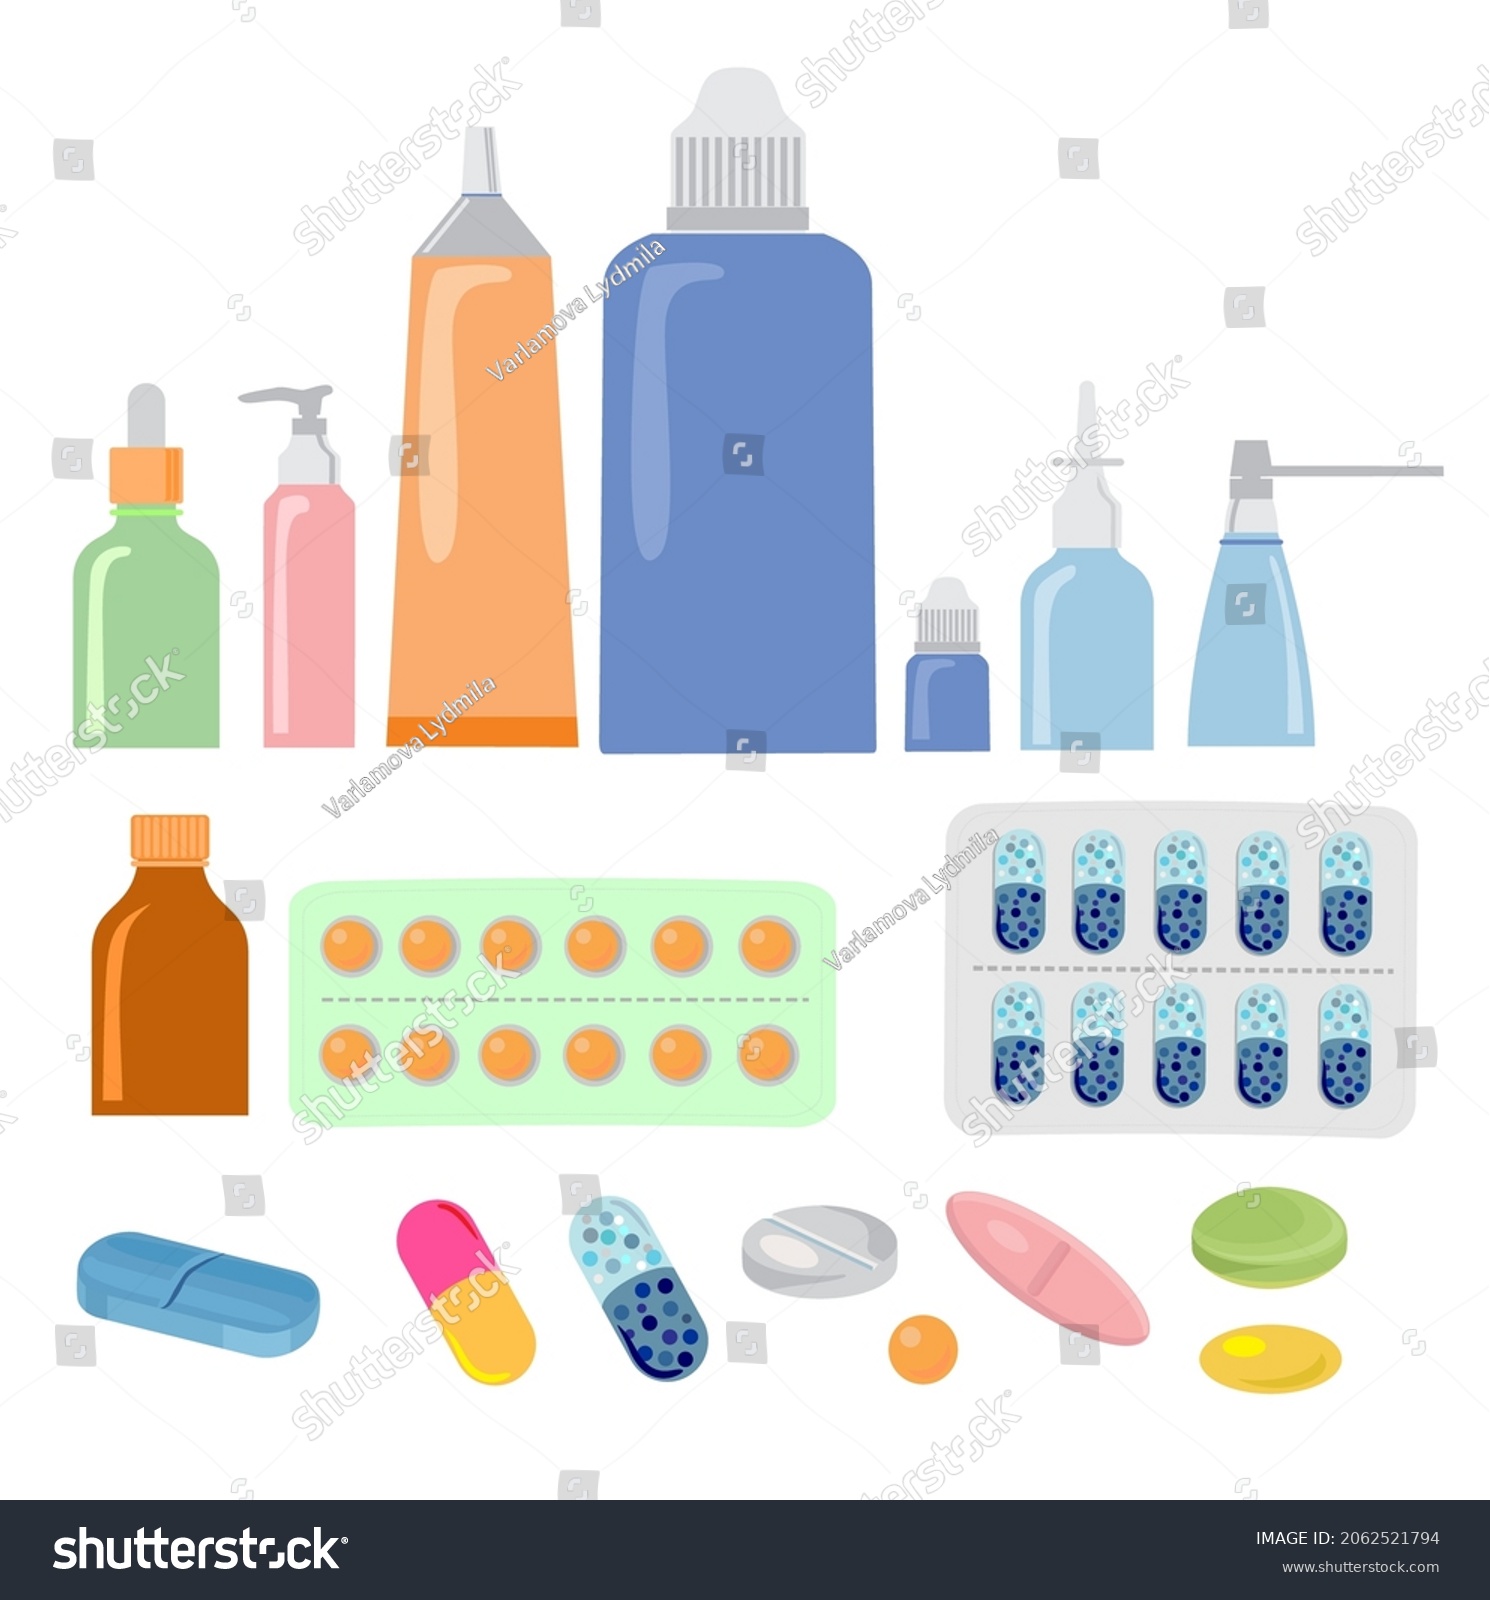 SVG of Various meds. Pills, capsules blisters, glass bottles with liquid medicine and plastic tubes with caps. Drug medication and supplements collection. Flat style vector object illustration svg